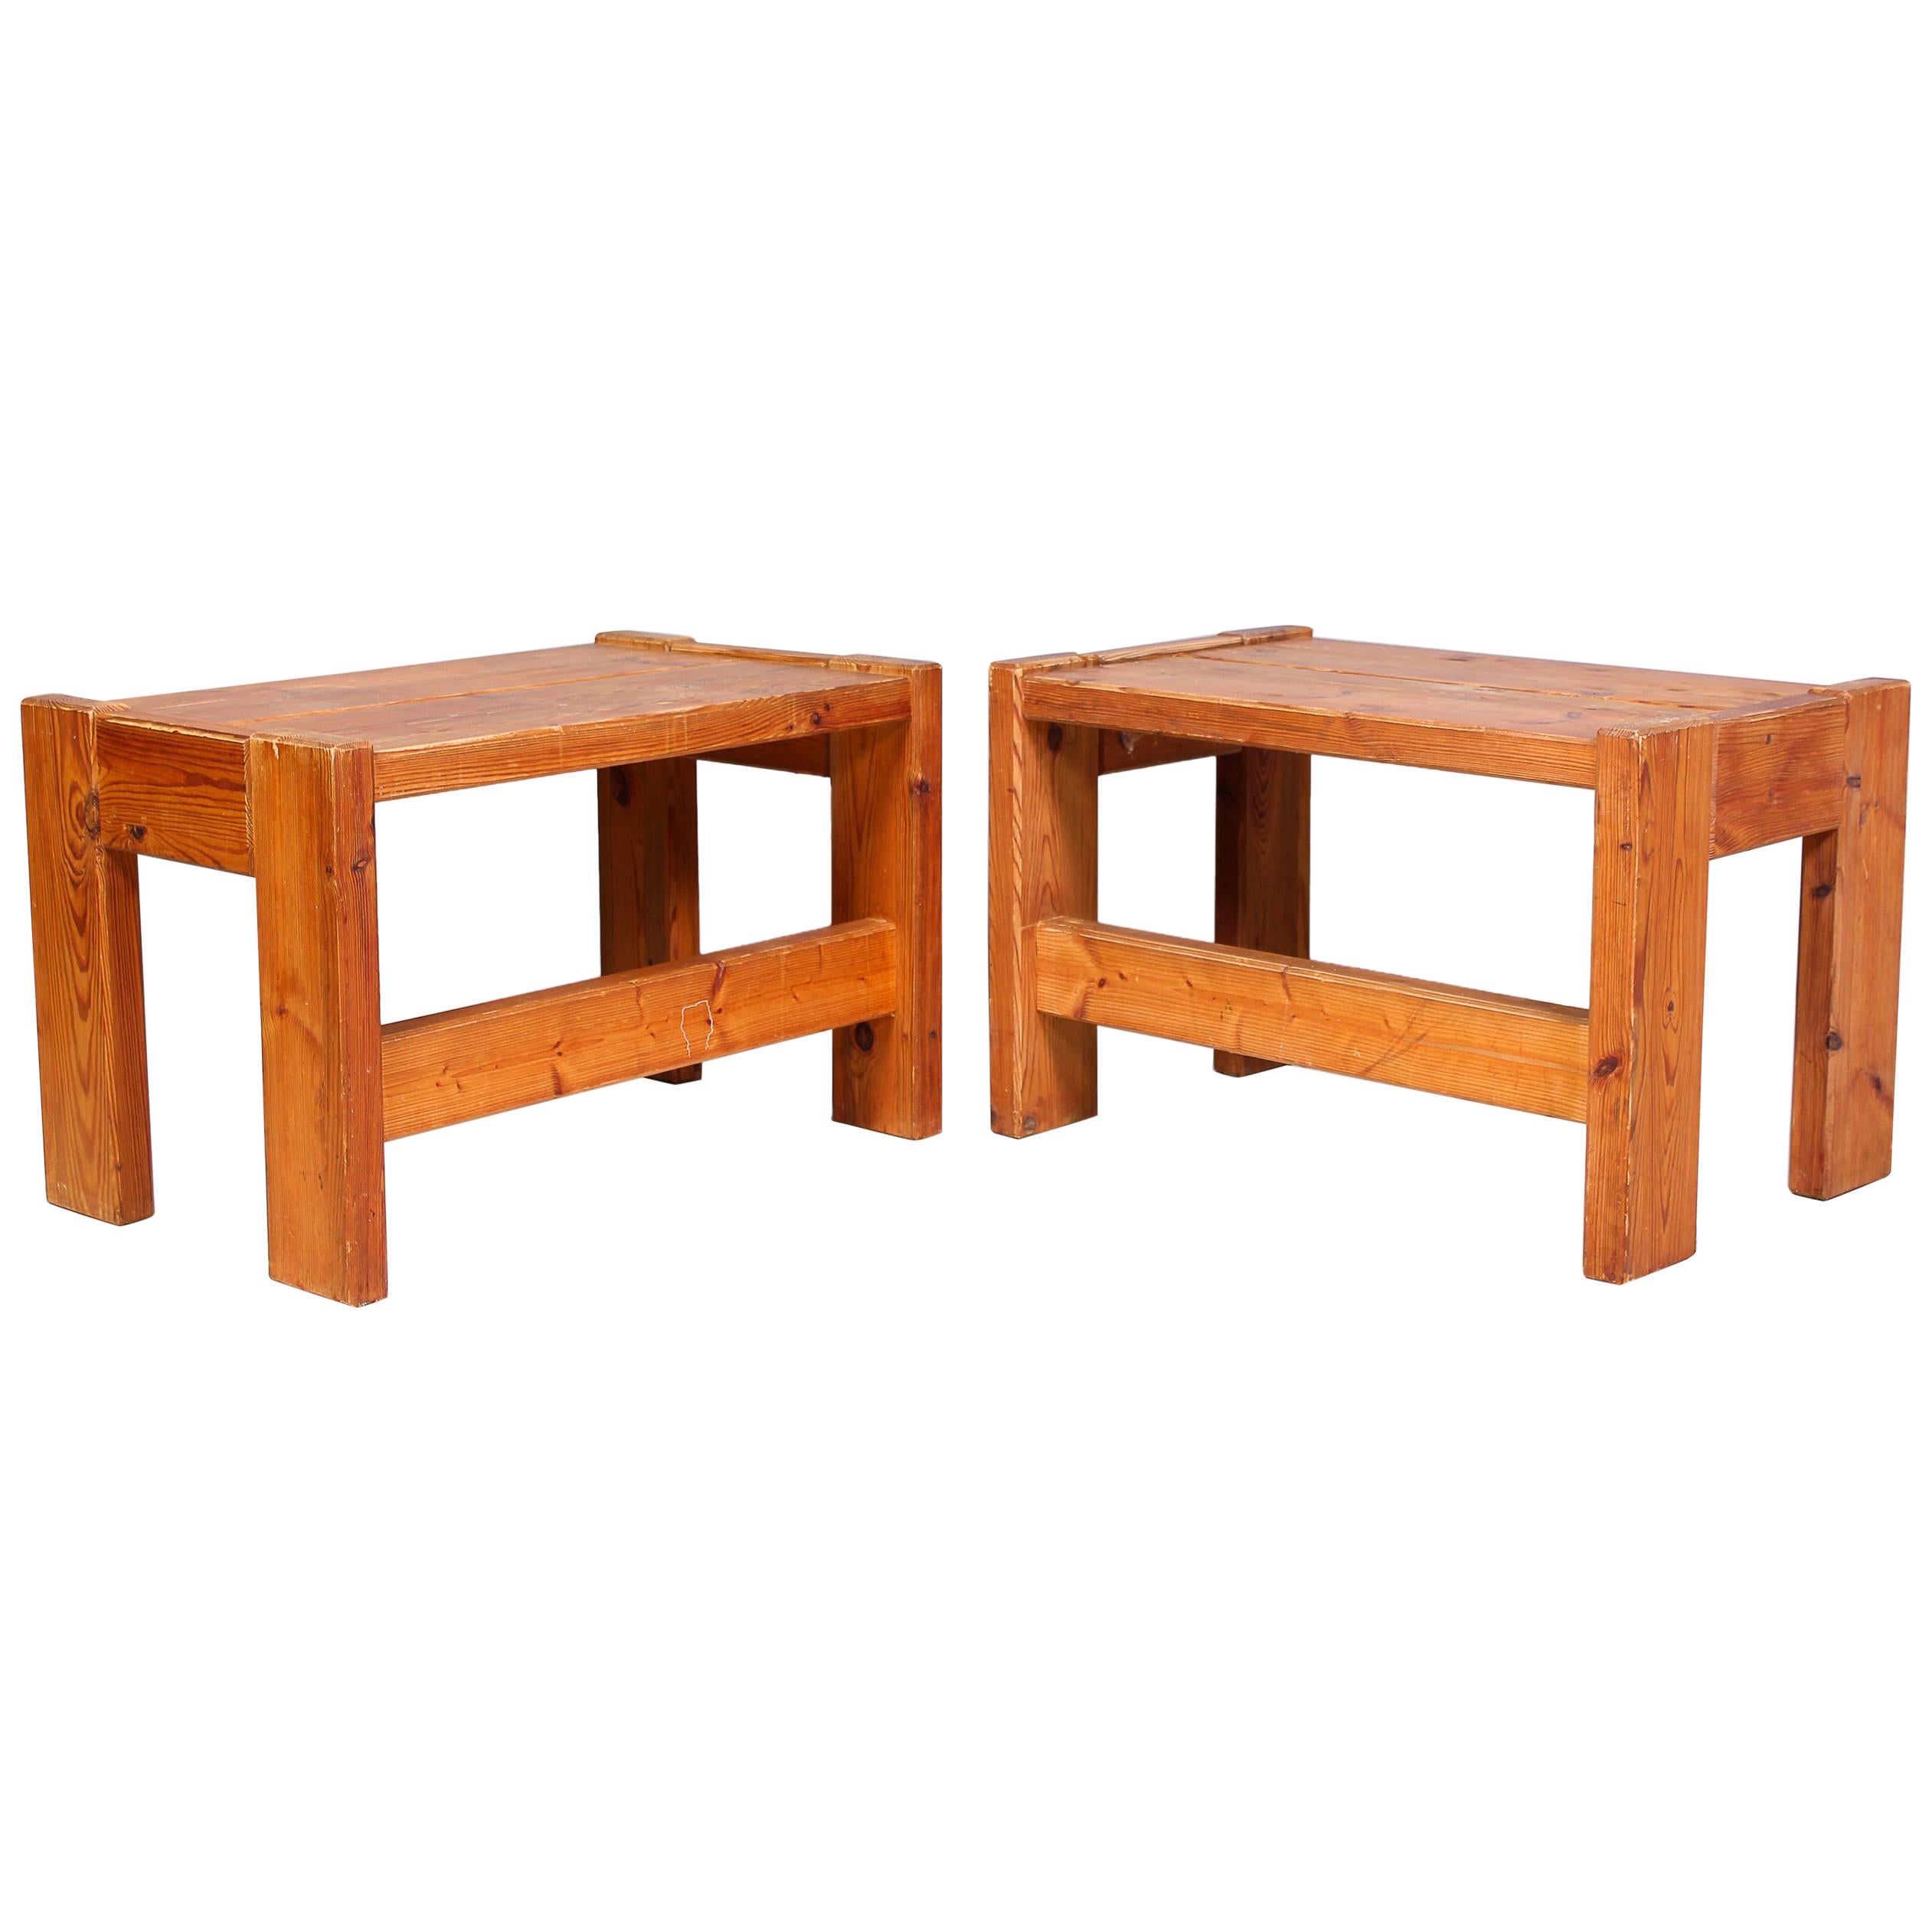 Pair of Solid Pine Side Tables / Benches, Sweden, 1970s